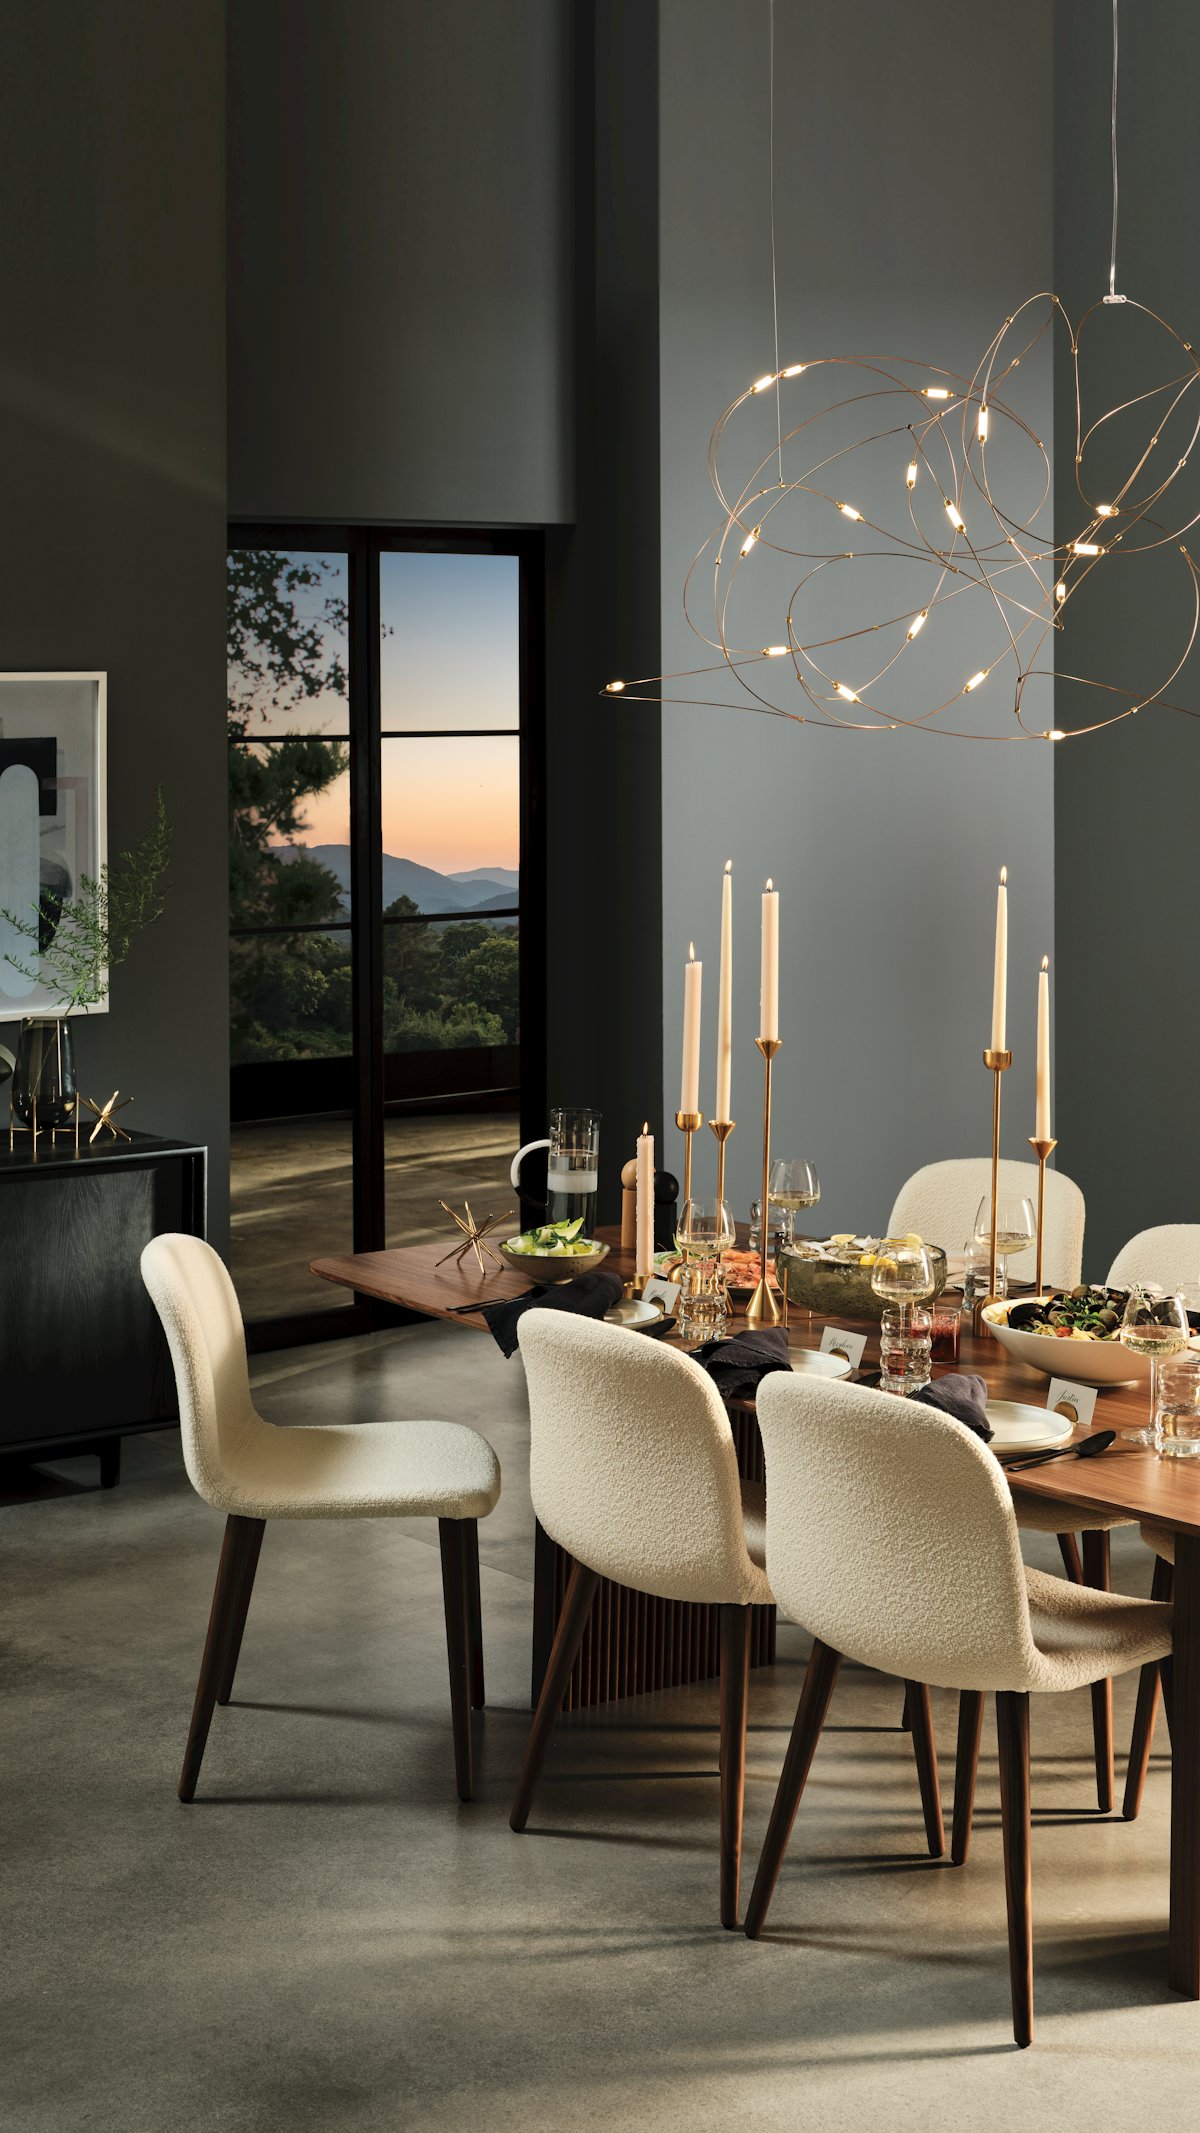 Ten Table dining room with Bacco Chairs